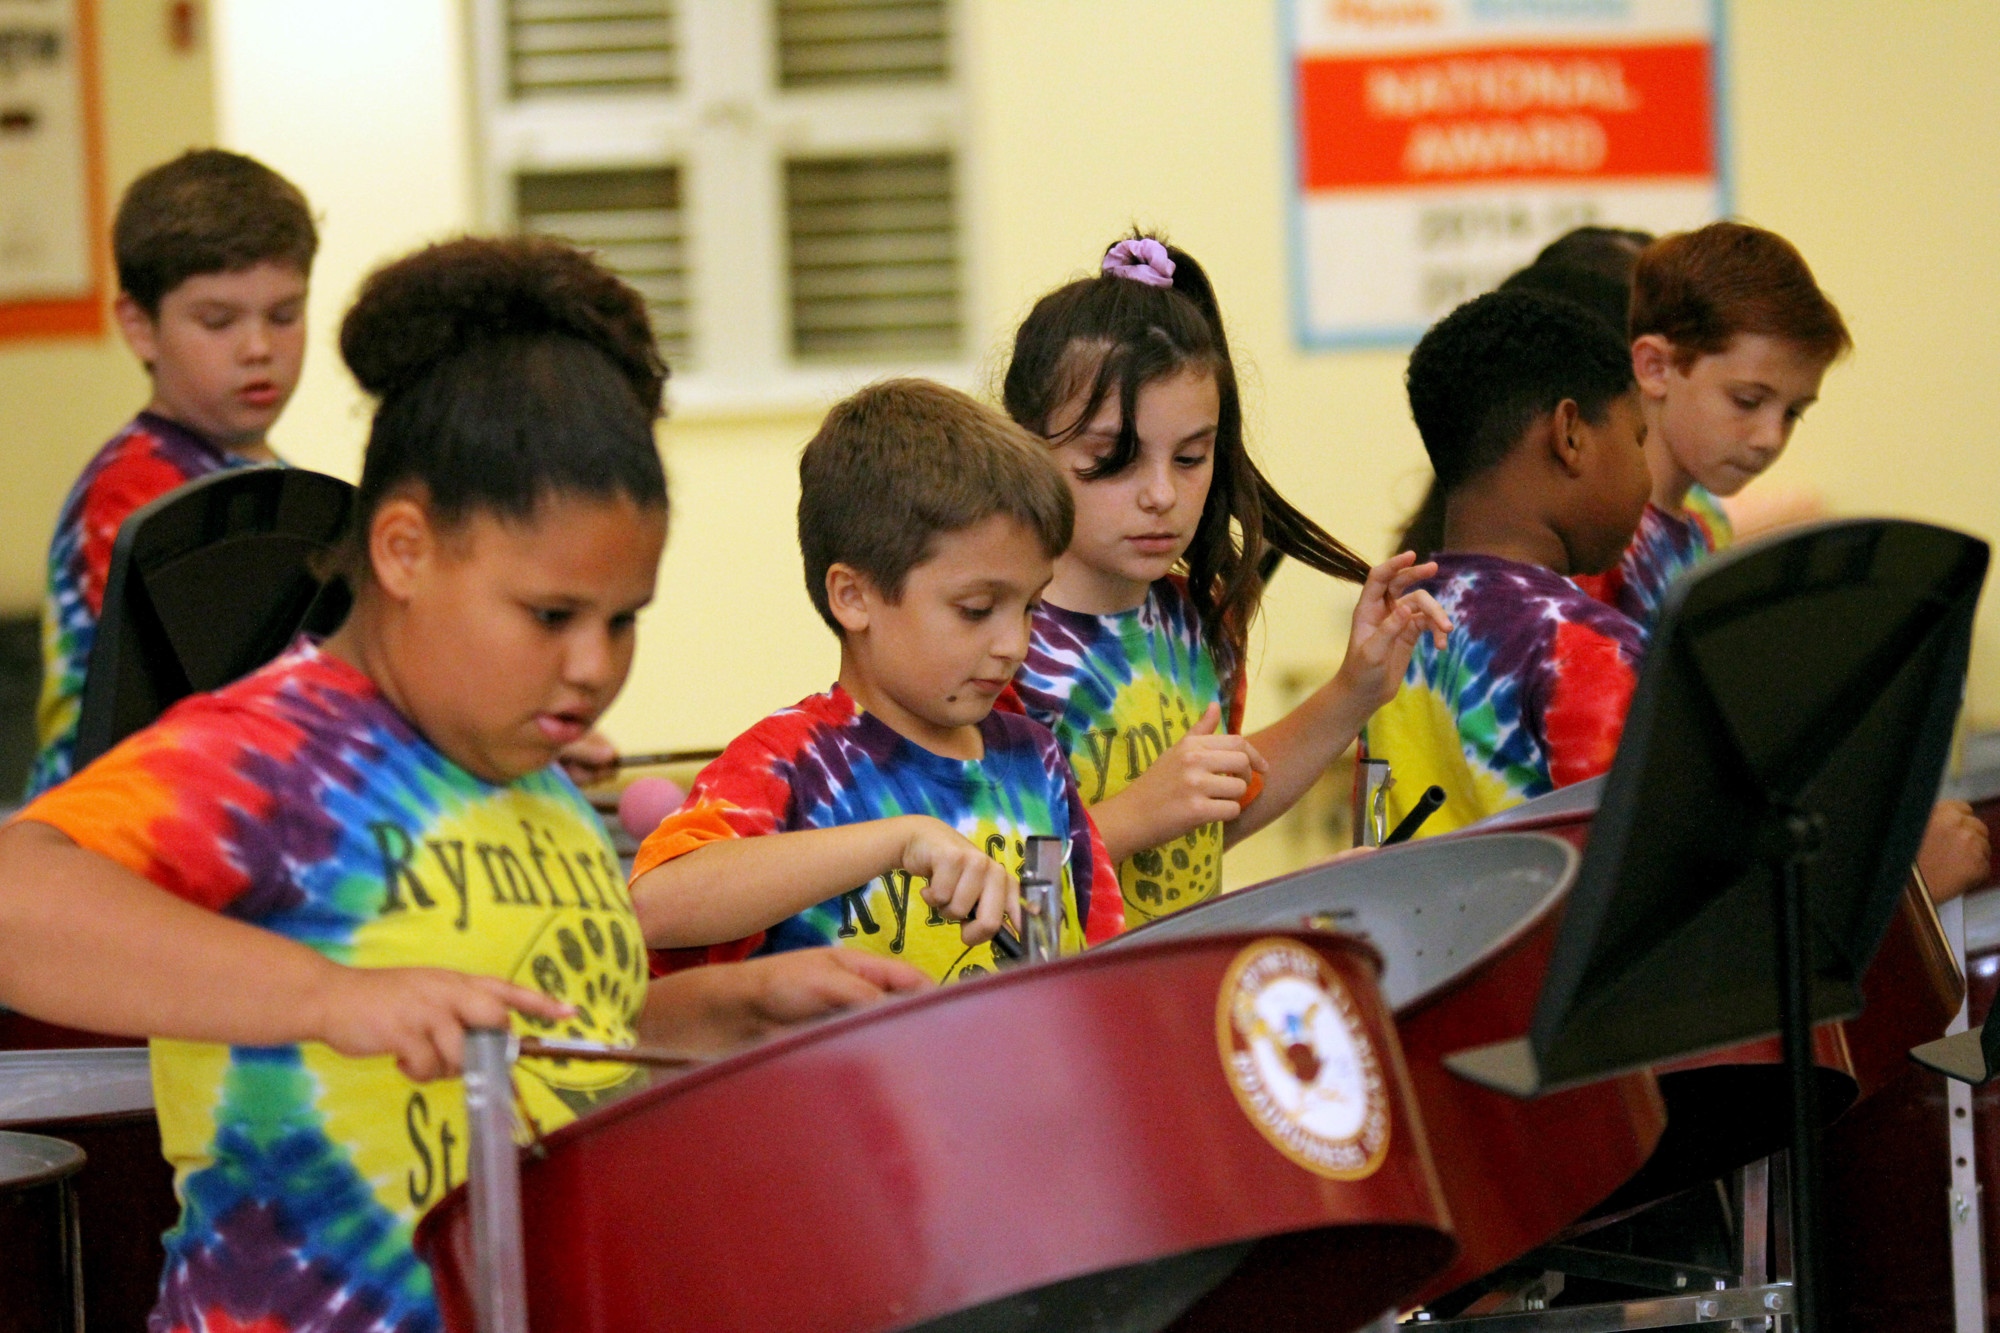 Tyler Grady, Tyra Saterfield, Lukas Notaras, Morgan Chaffe, Amar Haughton and William (Billy) Stone play the steel drums. Courtesy photo by Steven Notaras Photography